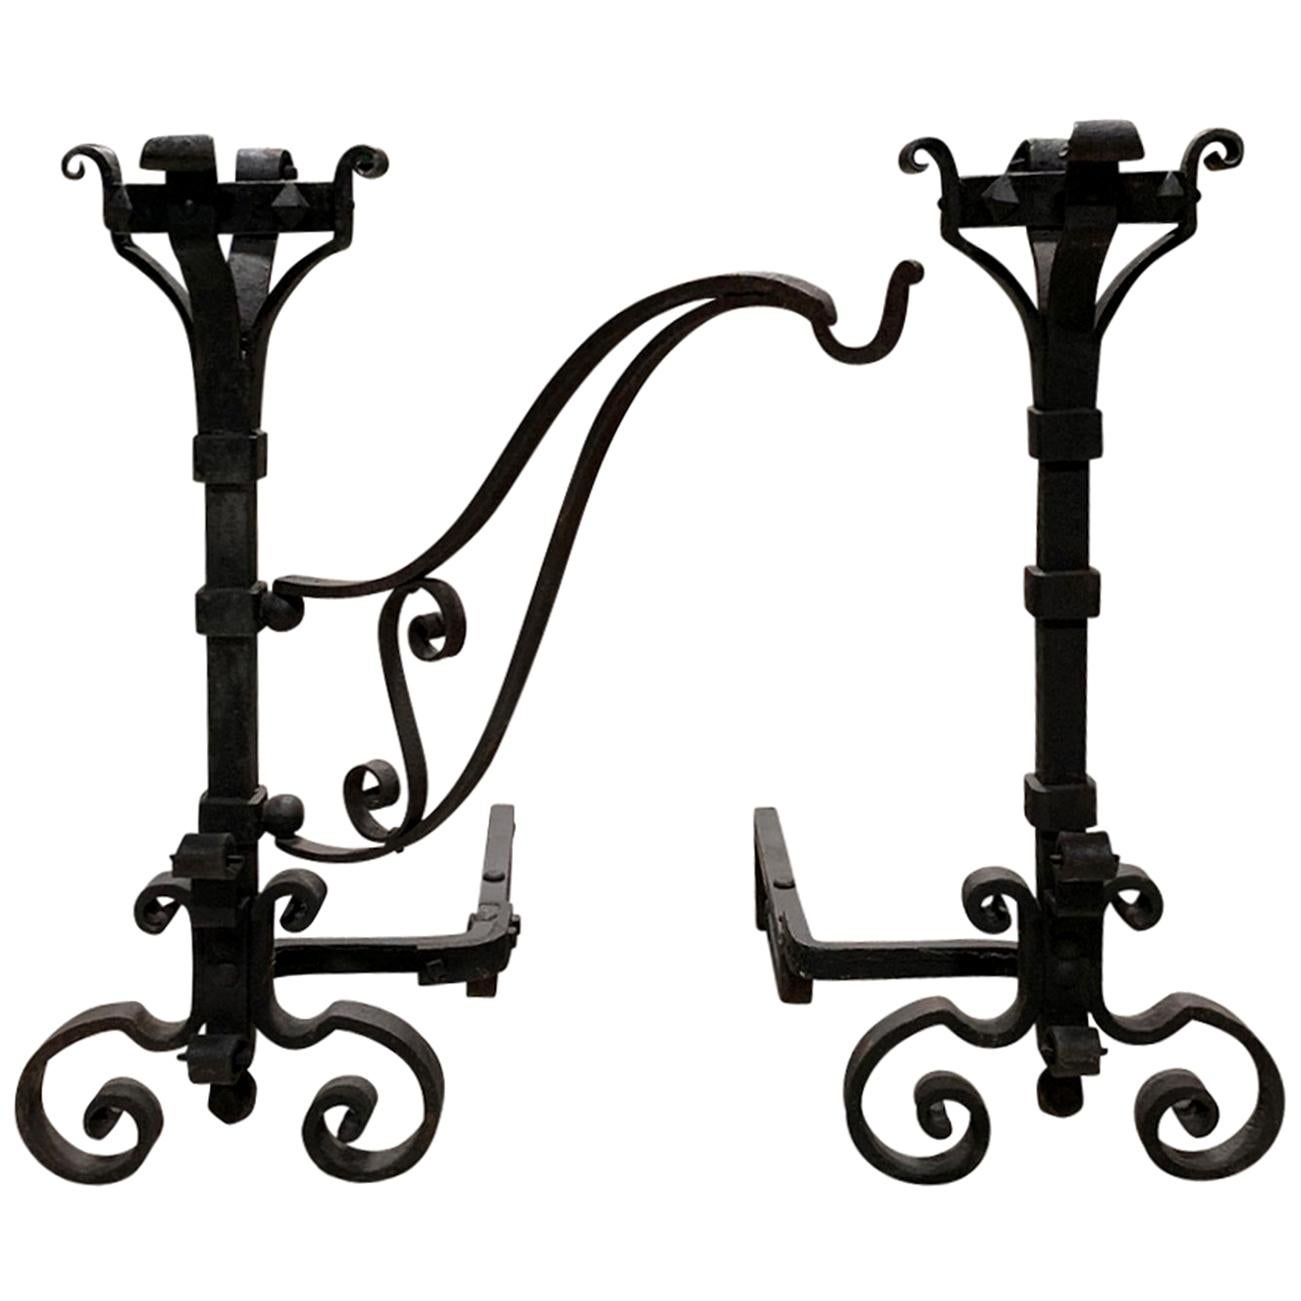 Pair of 19th Century Hand-Forged Iron Andirons with Swing-Arm for Cooking For Sale